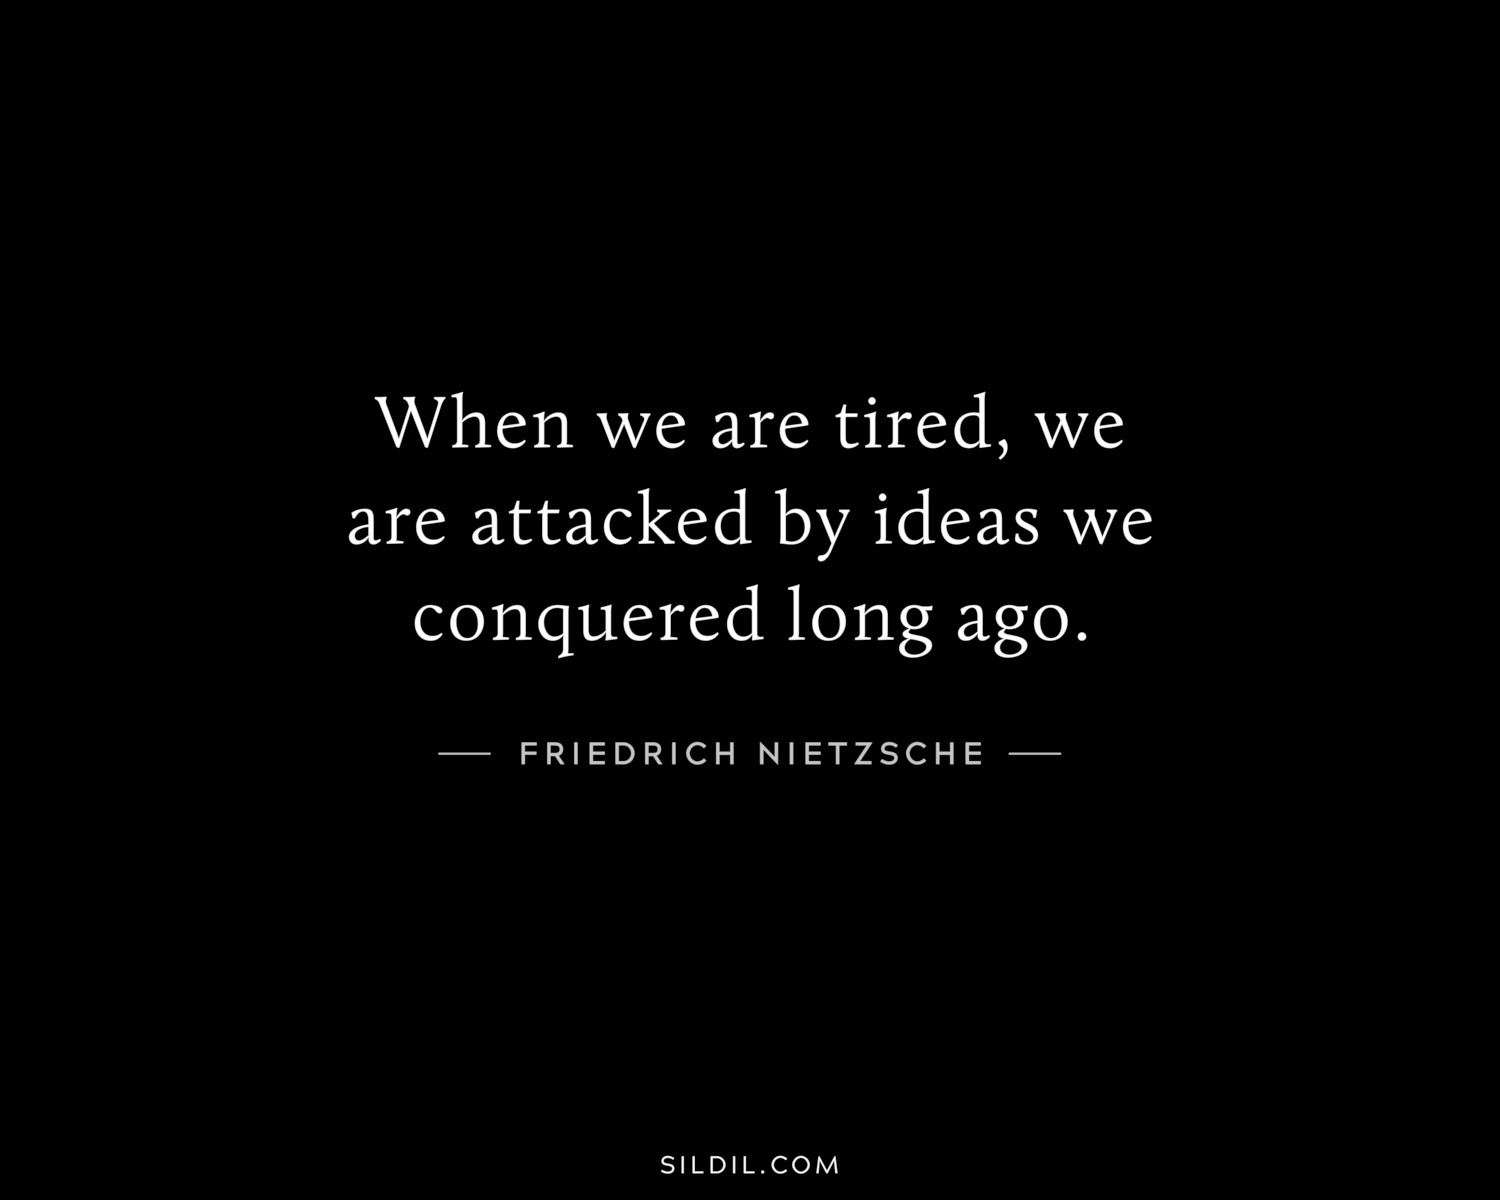 When we are tired, we are attacked by ideas we conquered long ago.